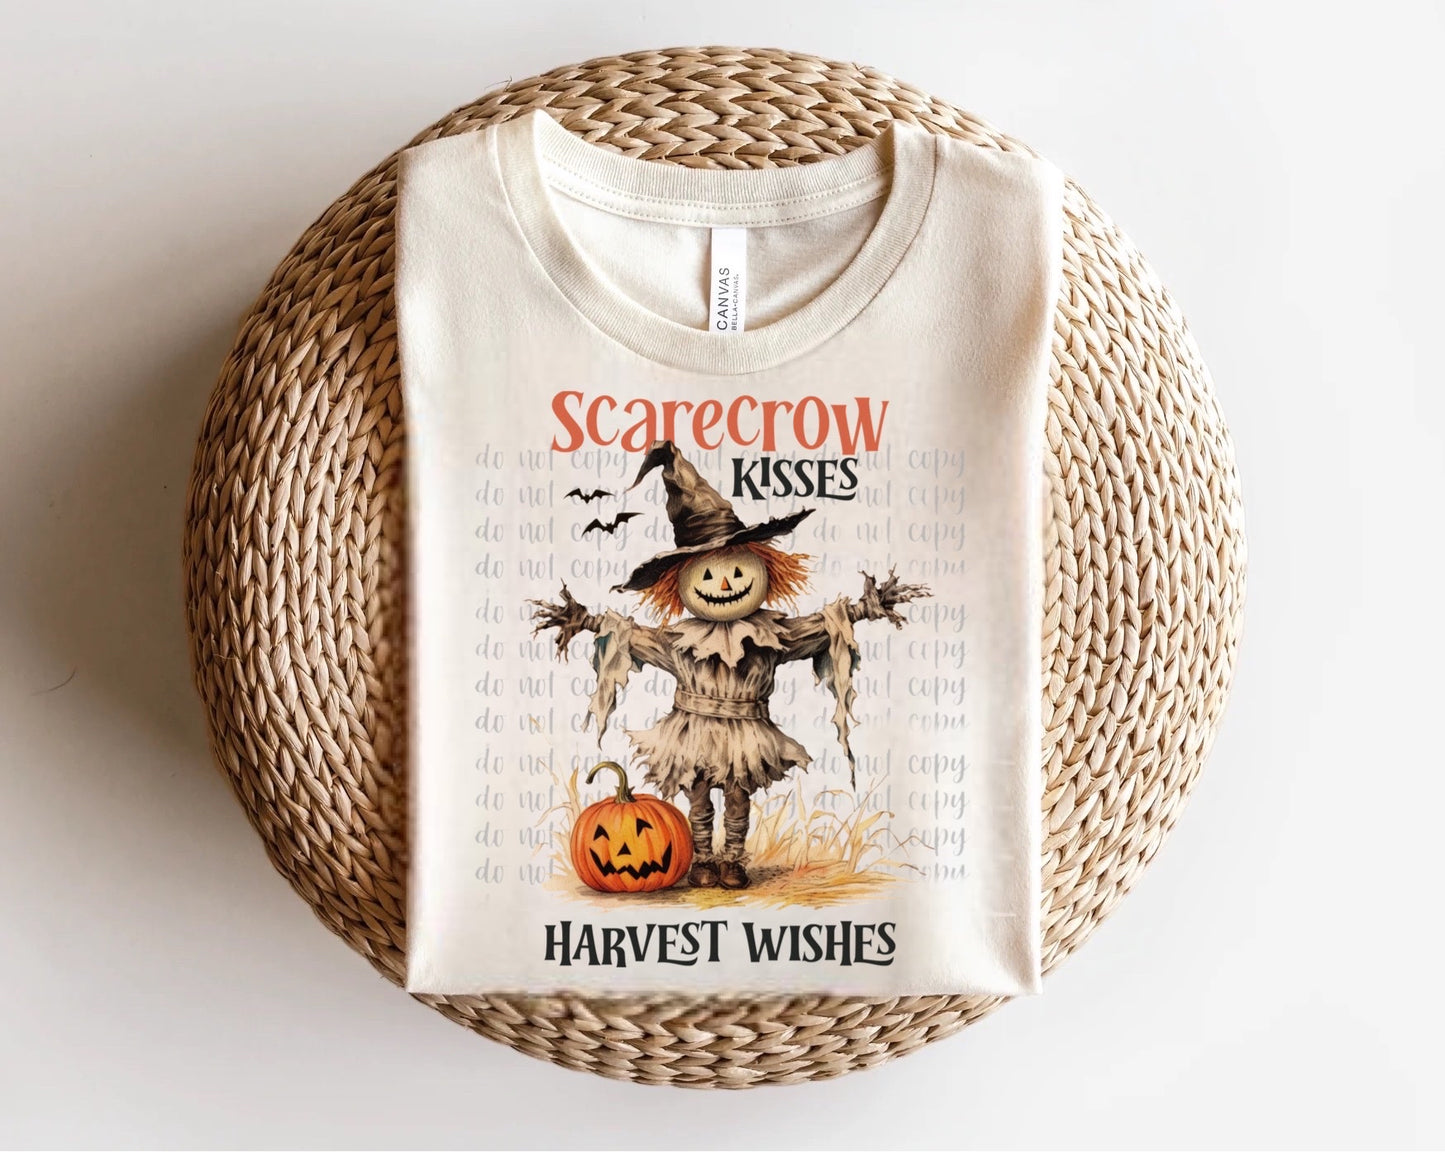 Scarecrow Kisses Harvest Wishes Direct to Film Transfers